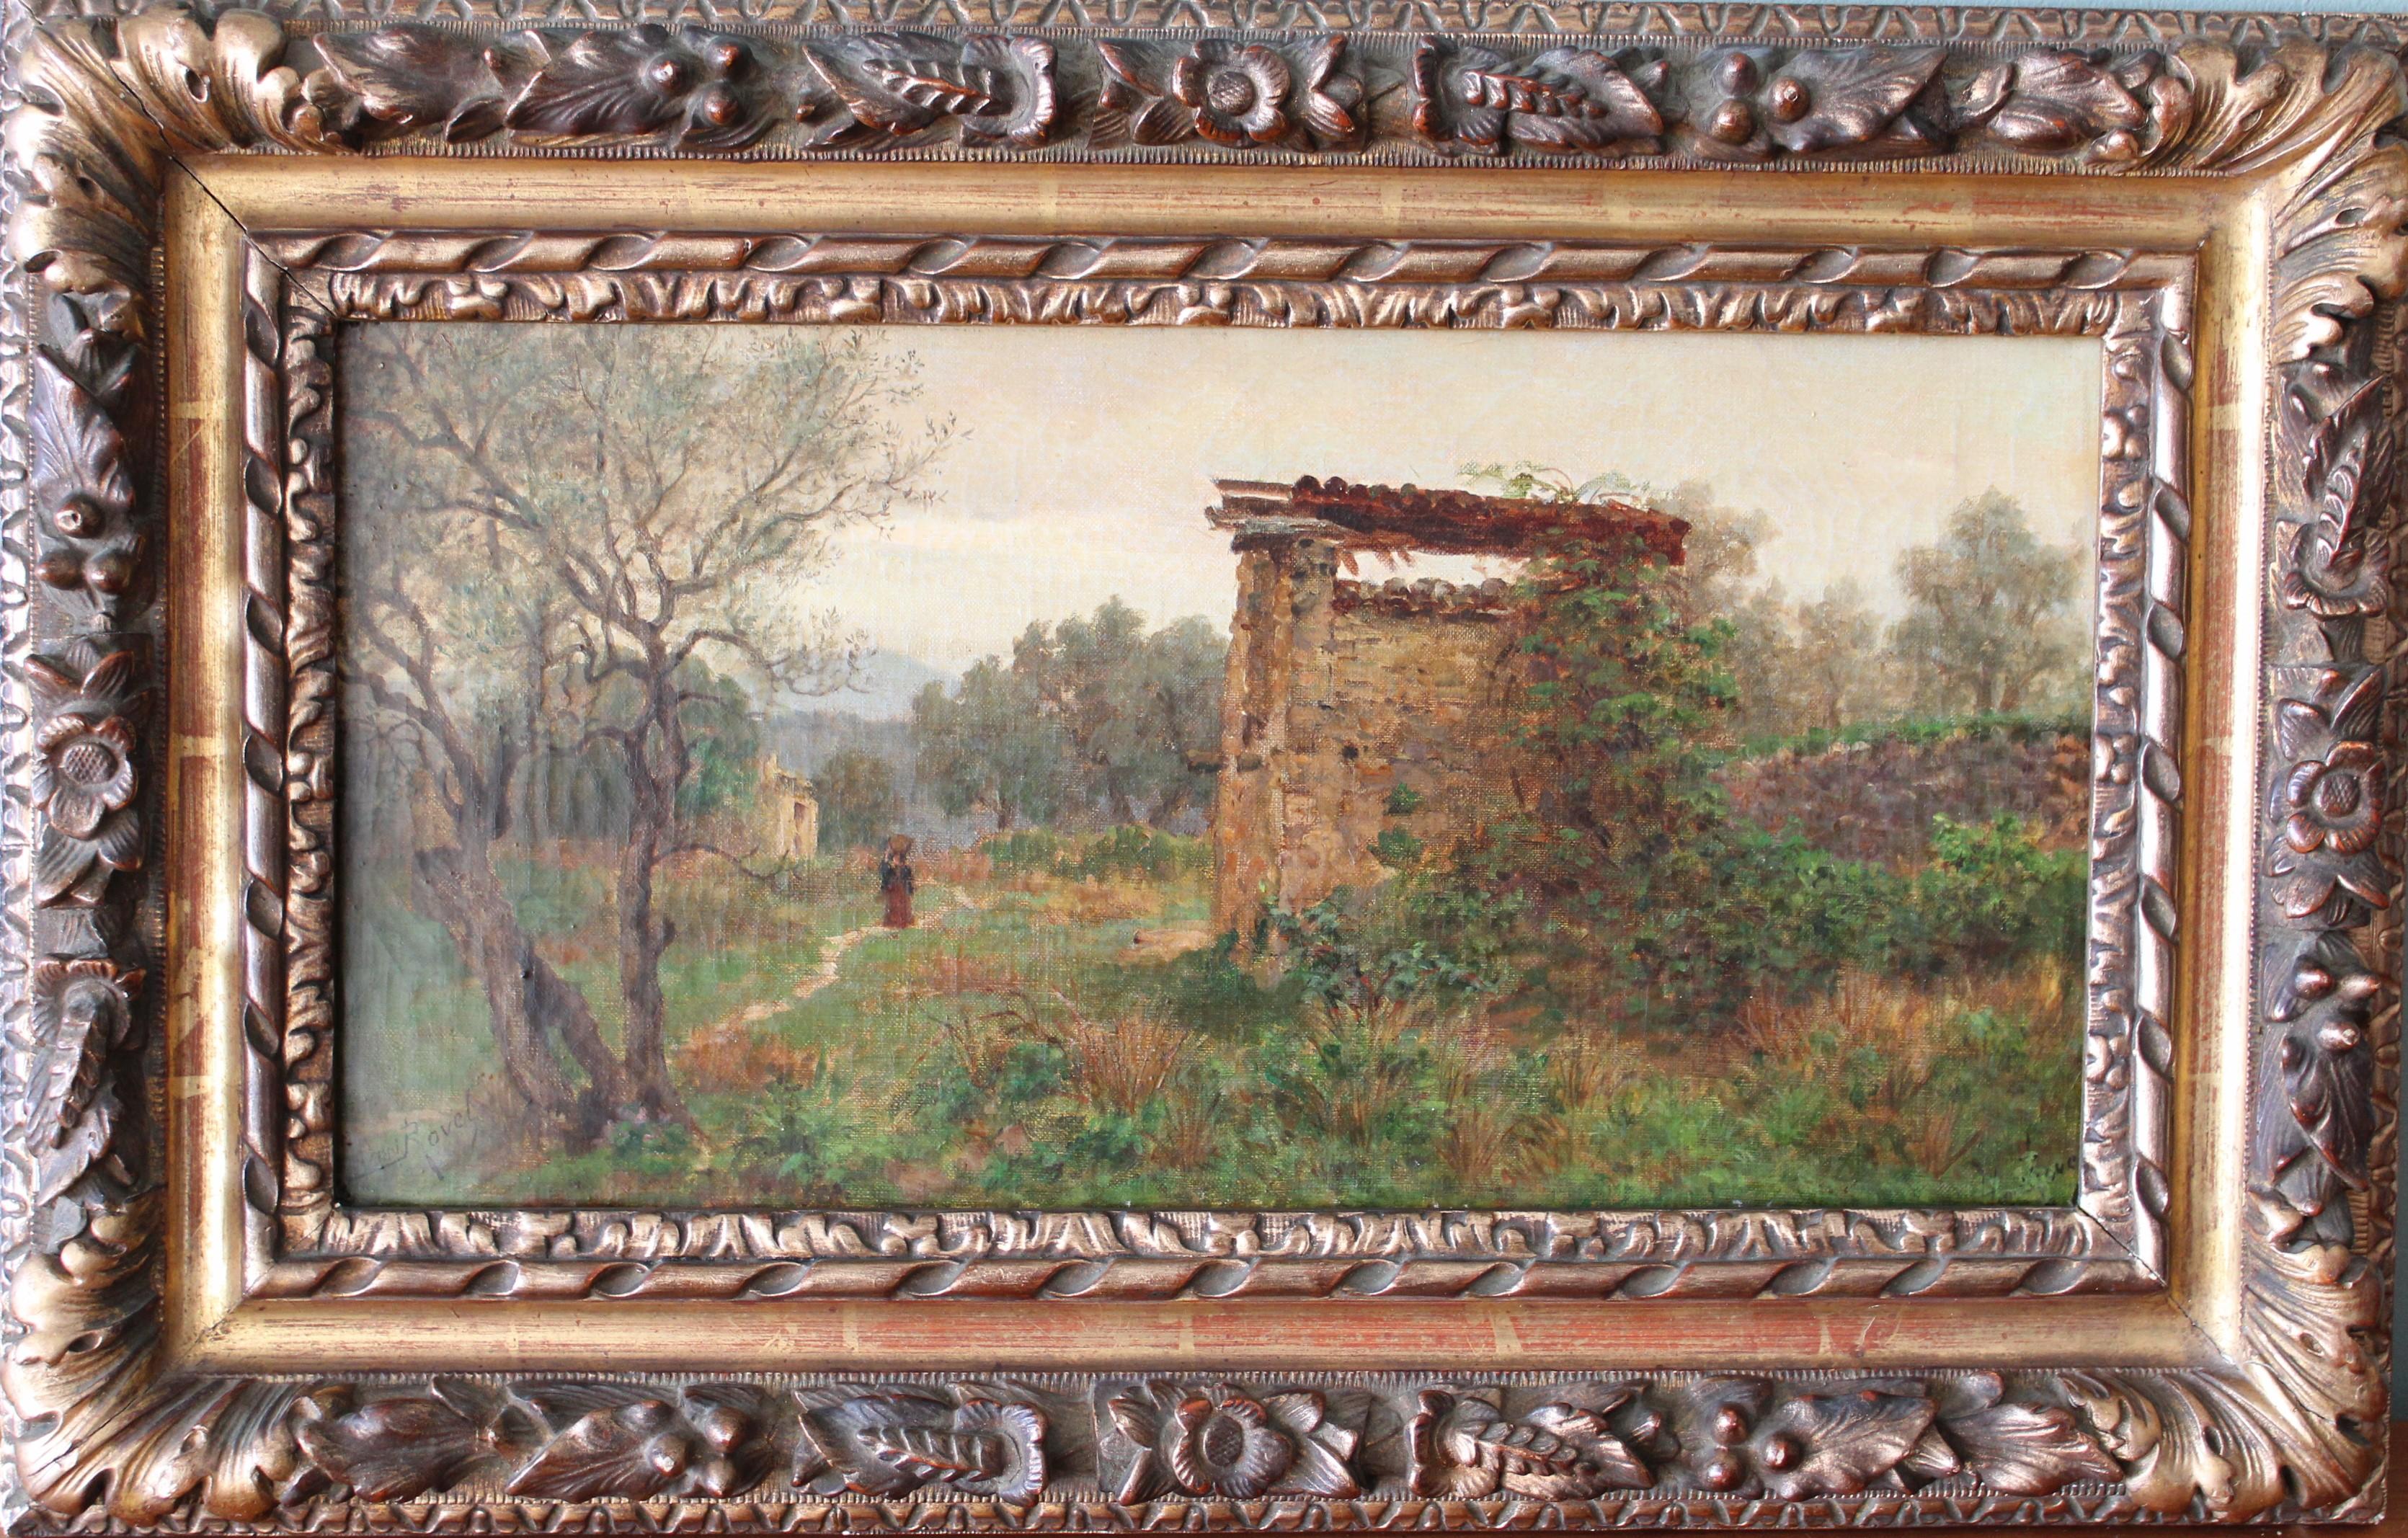 Antique French landscape by French artist, Henri Rovel (1849-1926) signed in the lower left and dated 1900 in its original gilt frame.  This is an atmospheric Barbizon oil on canvas of the  French countryside and blue mountains beyond.   A woman